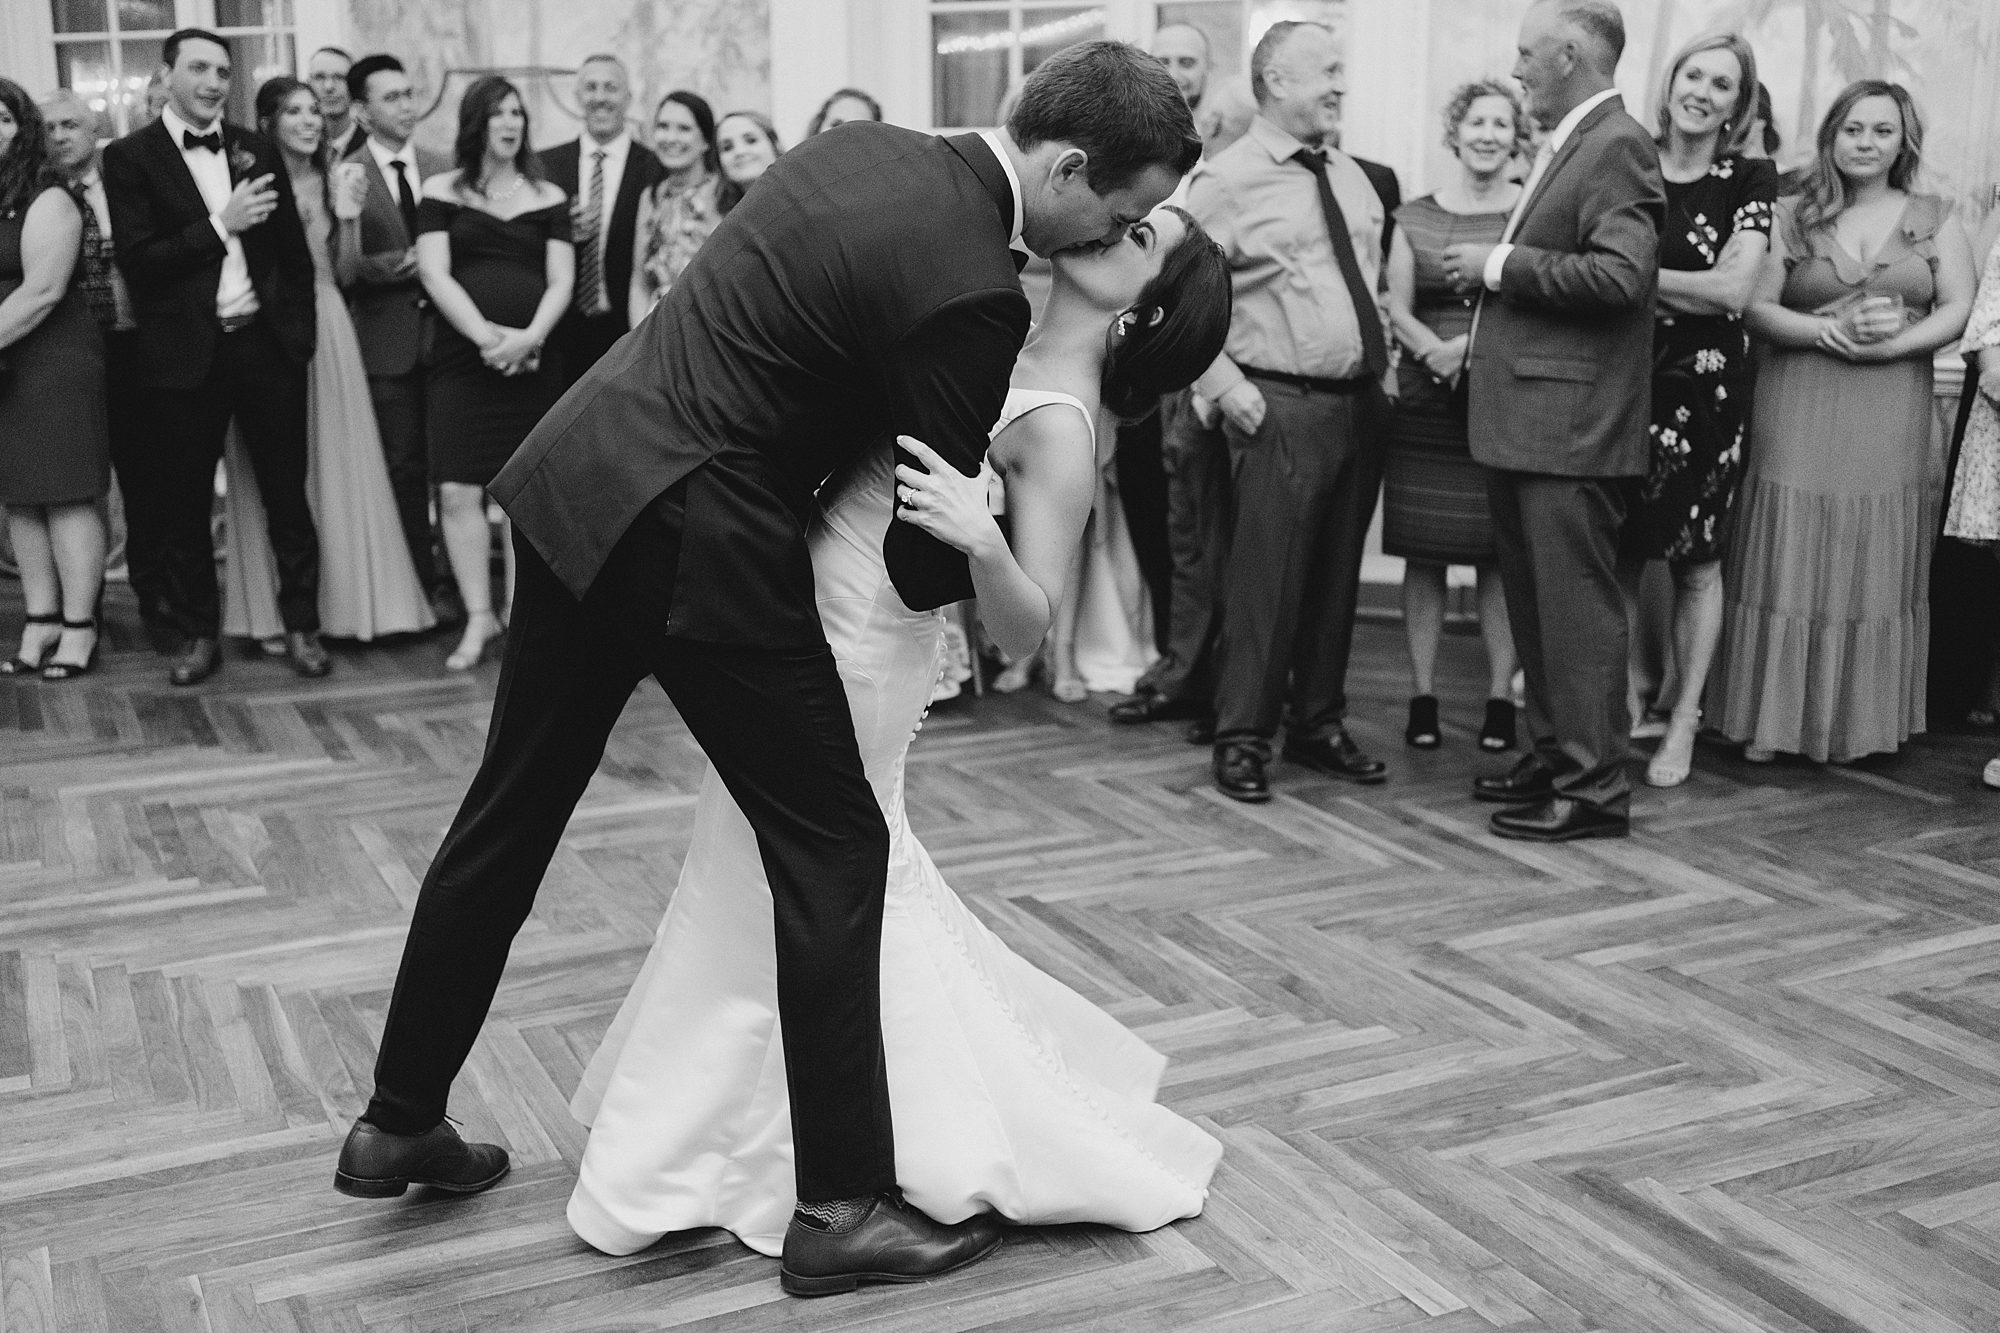 newlyweds share first dance together